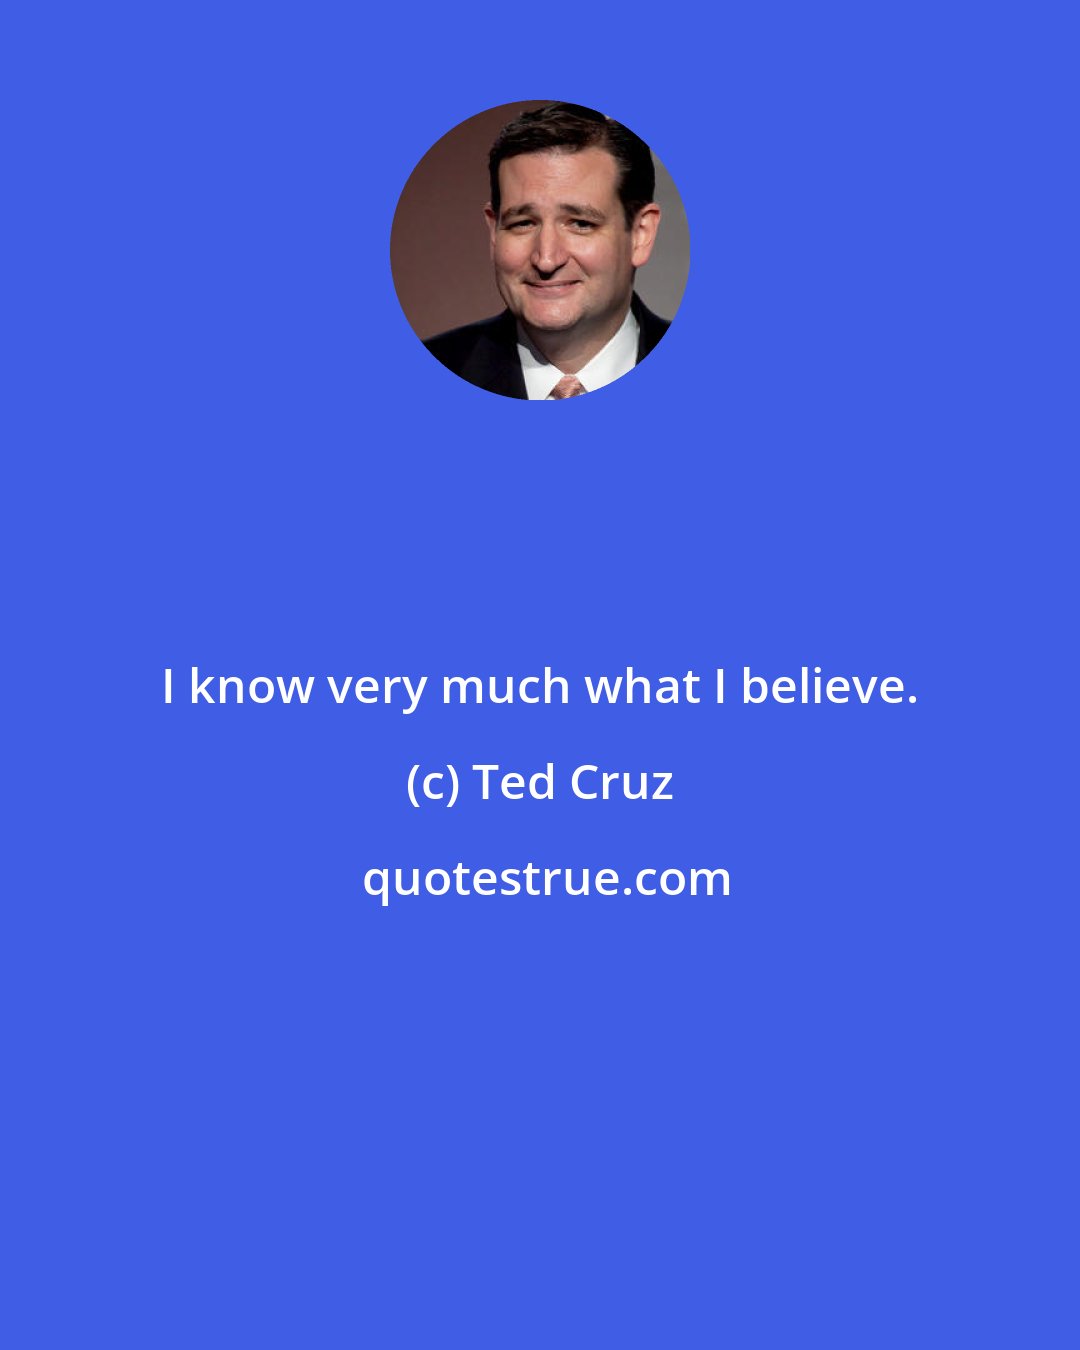 Ted Cruz: I know very much what I believe.